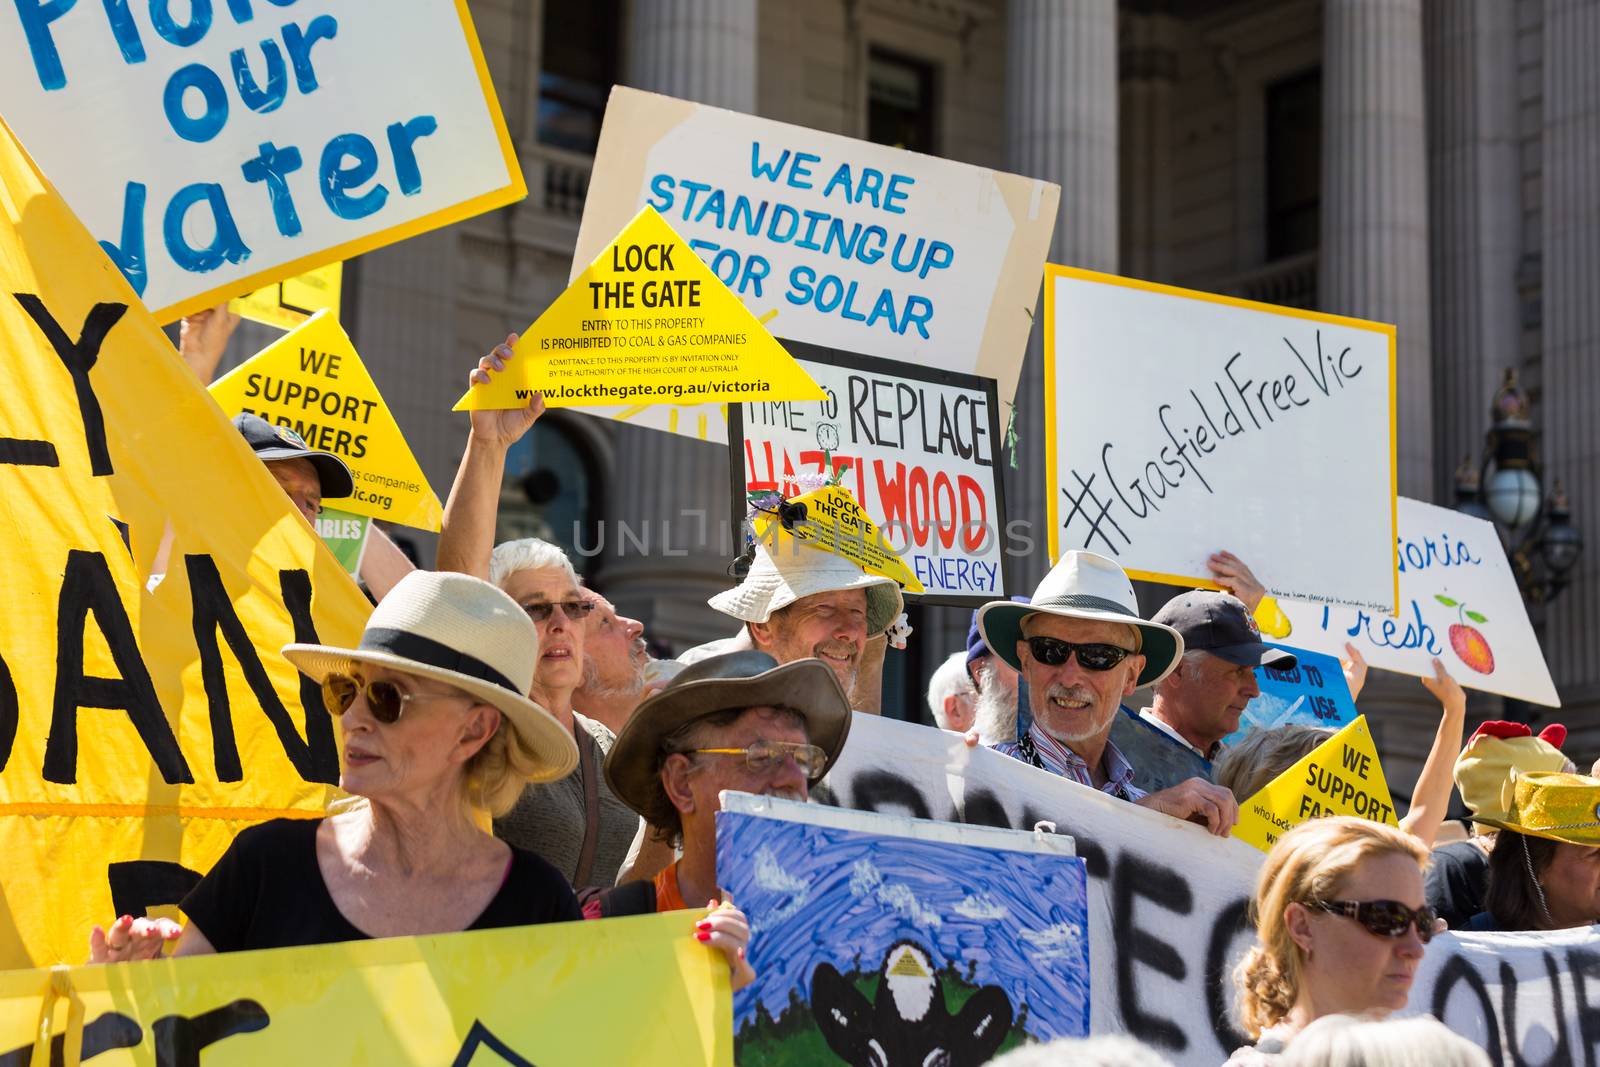 MELBOURNE/AUSTRALIA - FEBRUARY 9: Anti CSG protesters gather outside Parliament house in Melbourne to rally against Coal Seam Gas mining on February 9 - coinciding with the opening of Parliament.